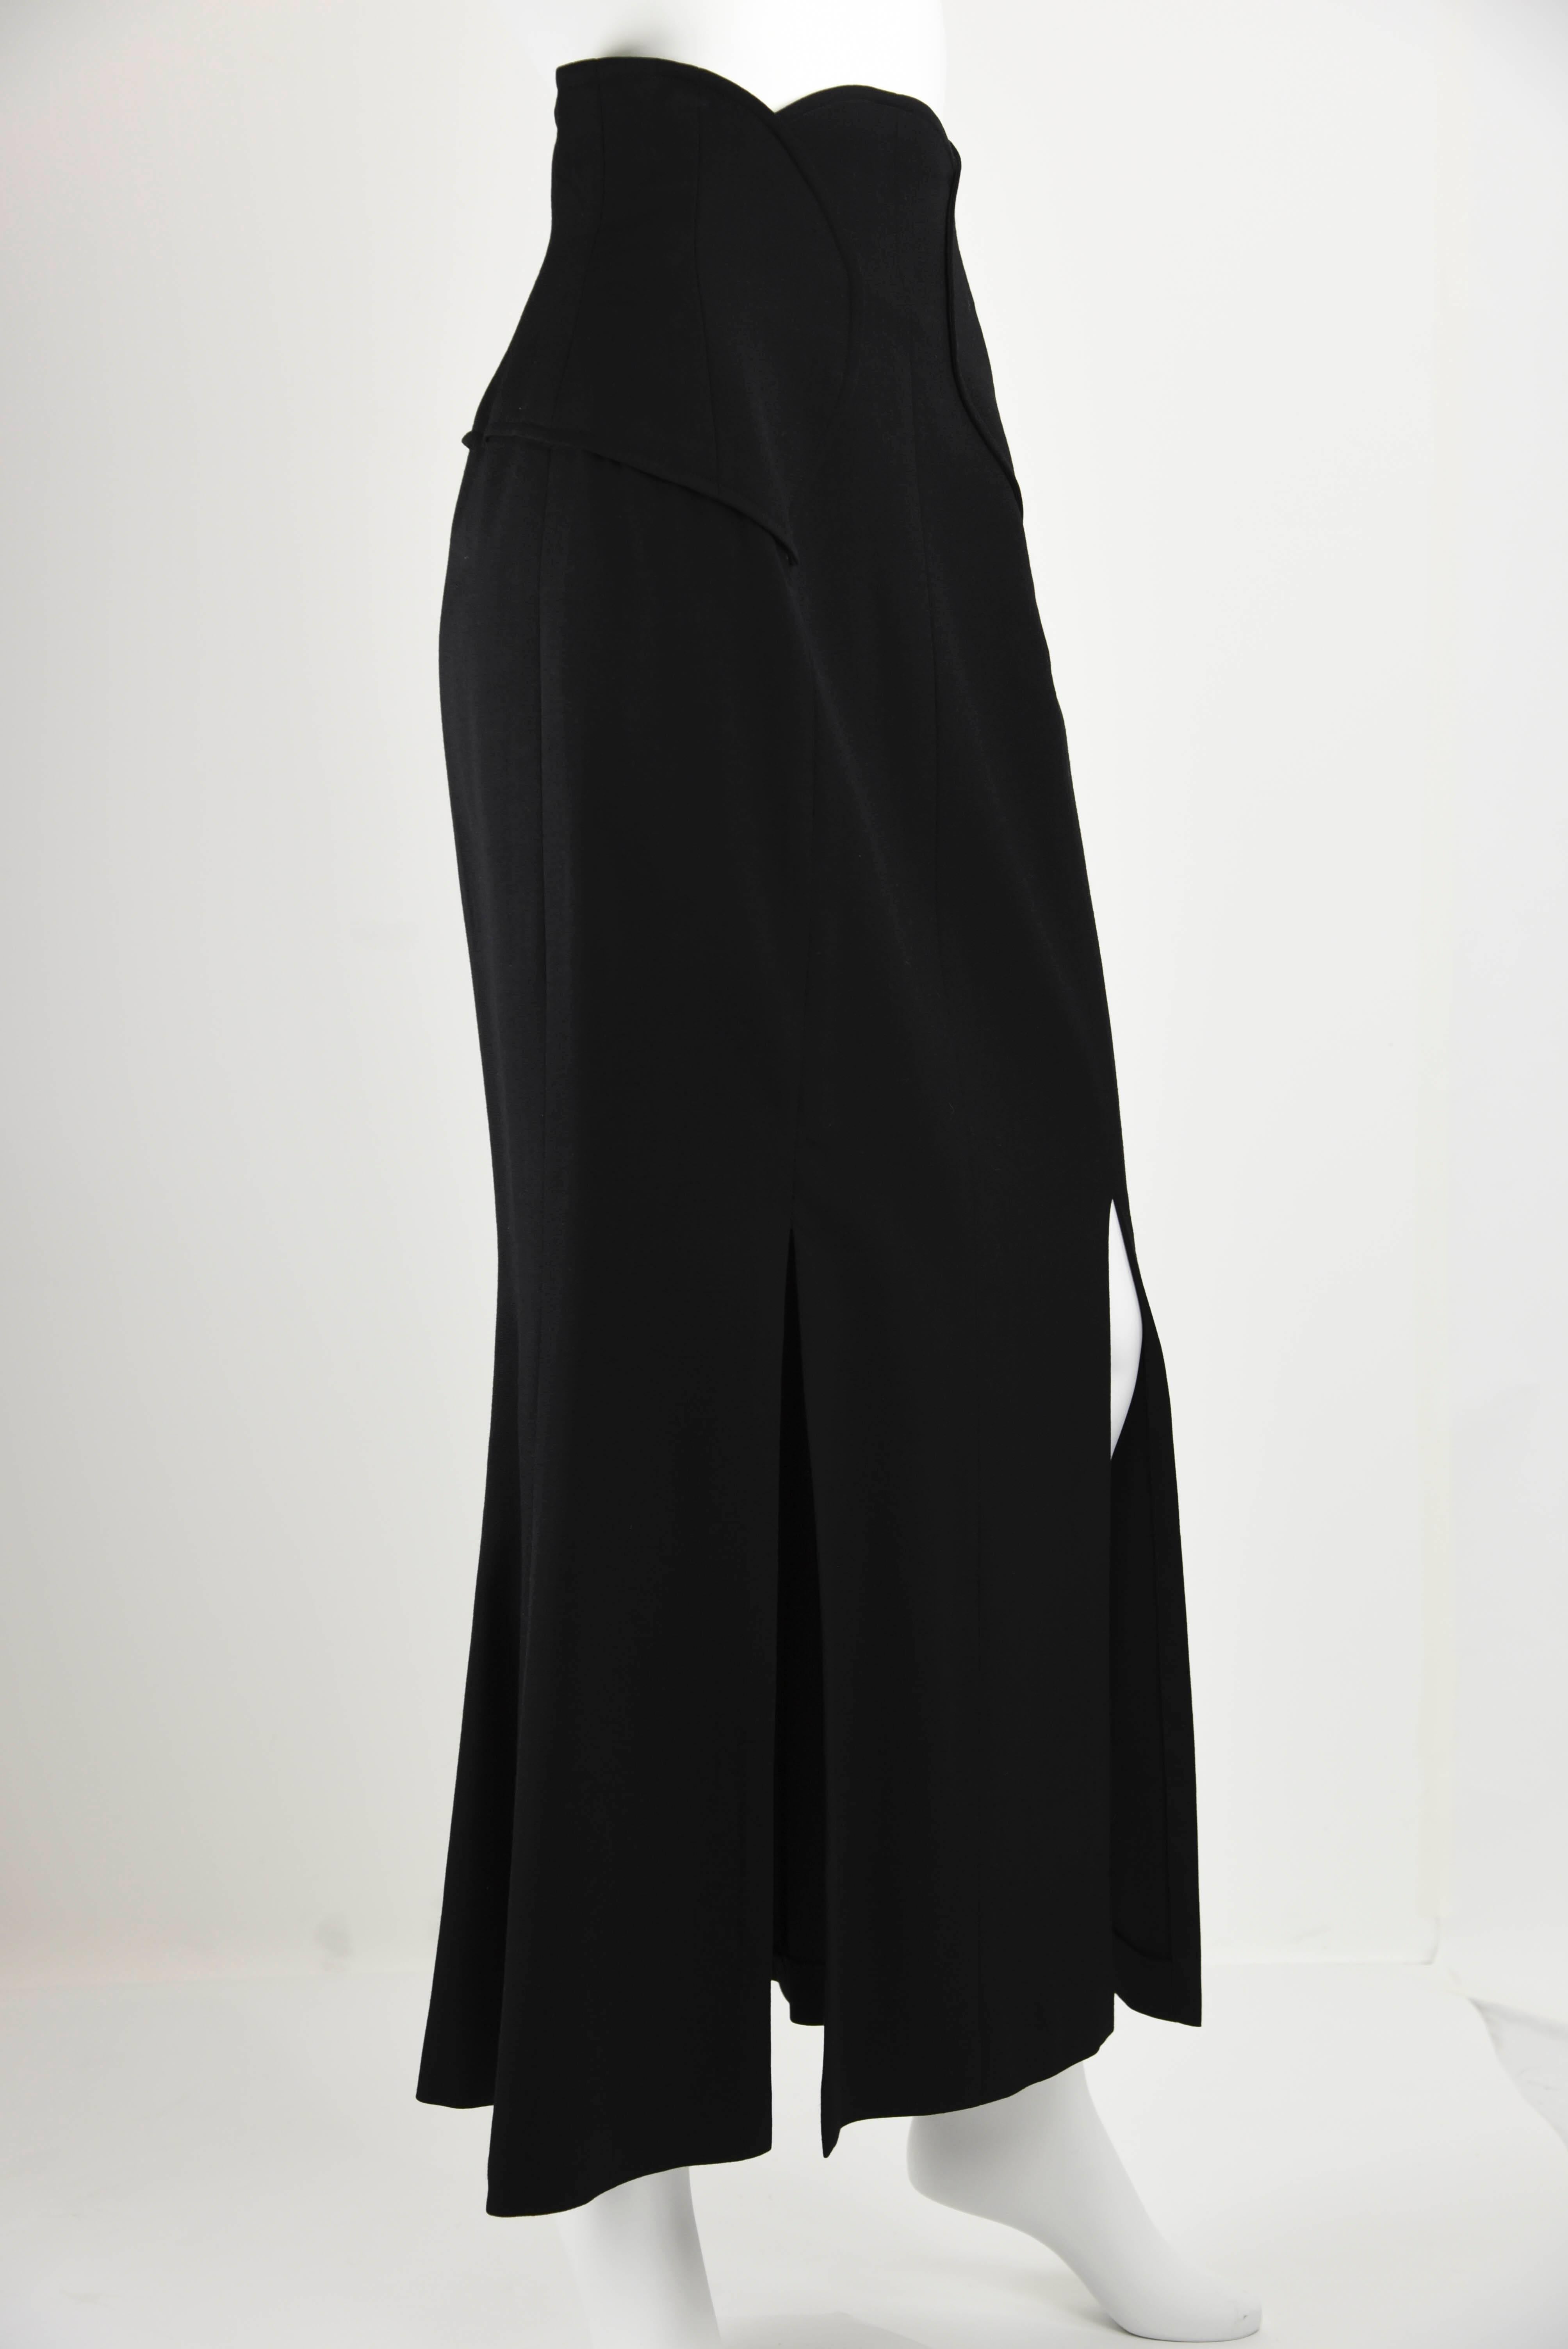 Chanel Boutique 1980's Long Black Skirt With Front Slits and Waist Detail FR 40 For Sale 4